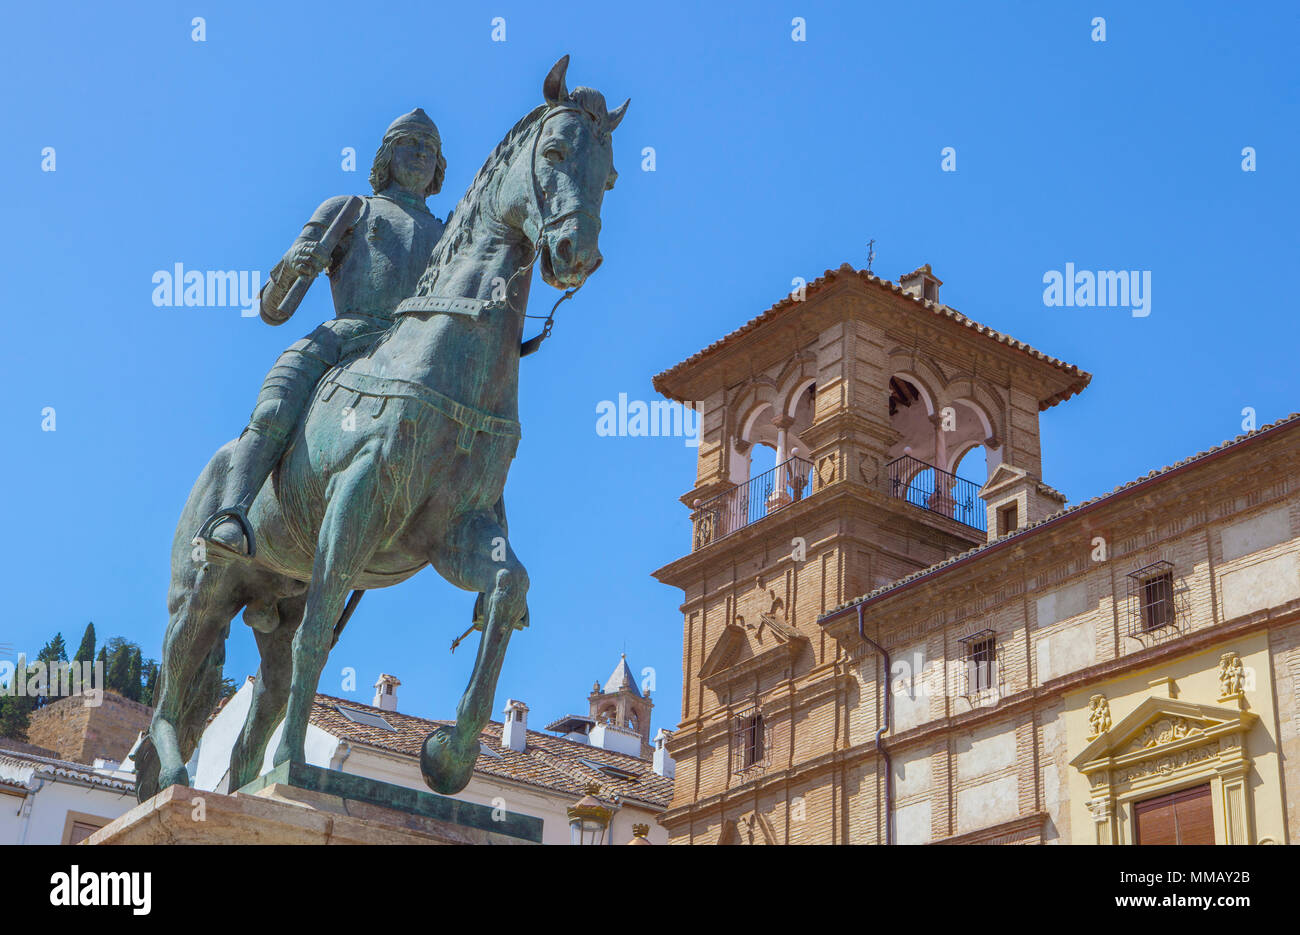 Antequera, Spain - July 14th, 2017: Equestrian Statue of Ferdinand I, King of Aragon, Antequera, Andalusia, Spain Stock Photo